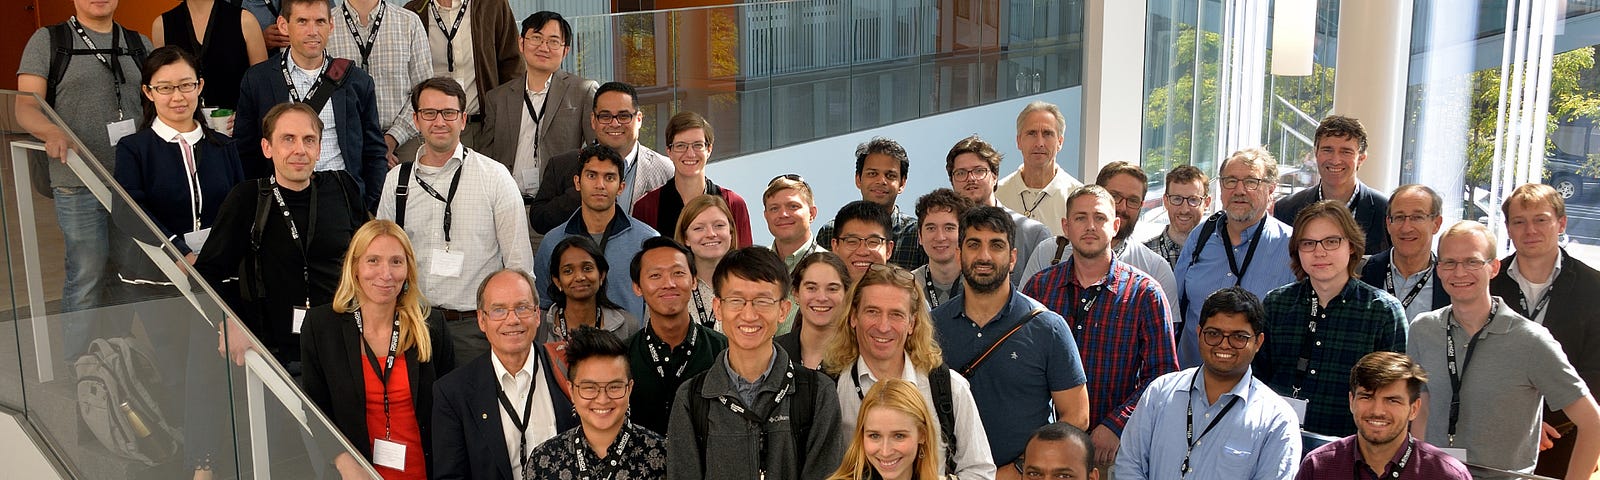 A large contingent of quantum scientists pose for a group photo on the stairs of the Singh Center for Nanotechnology